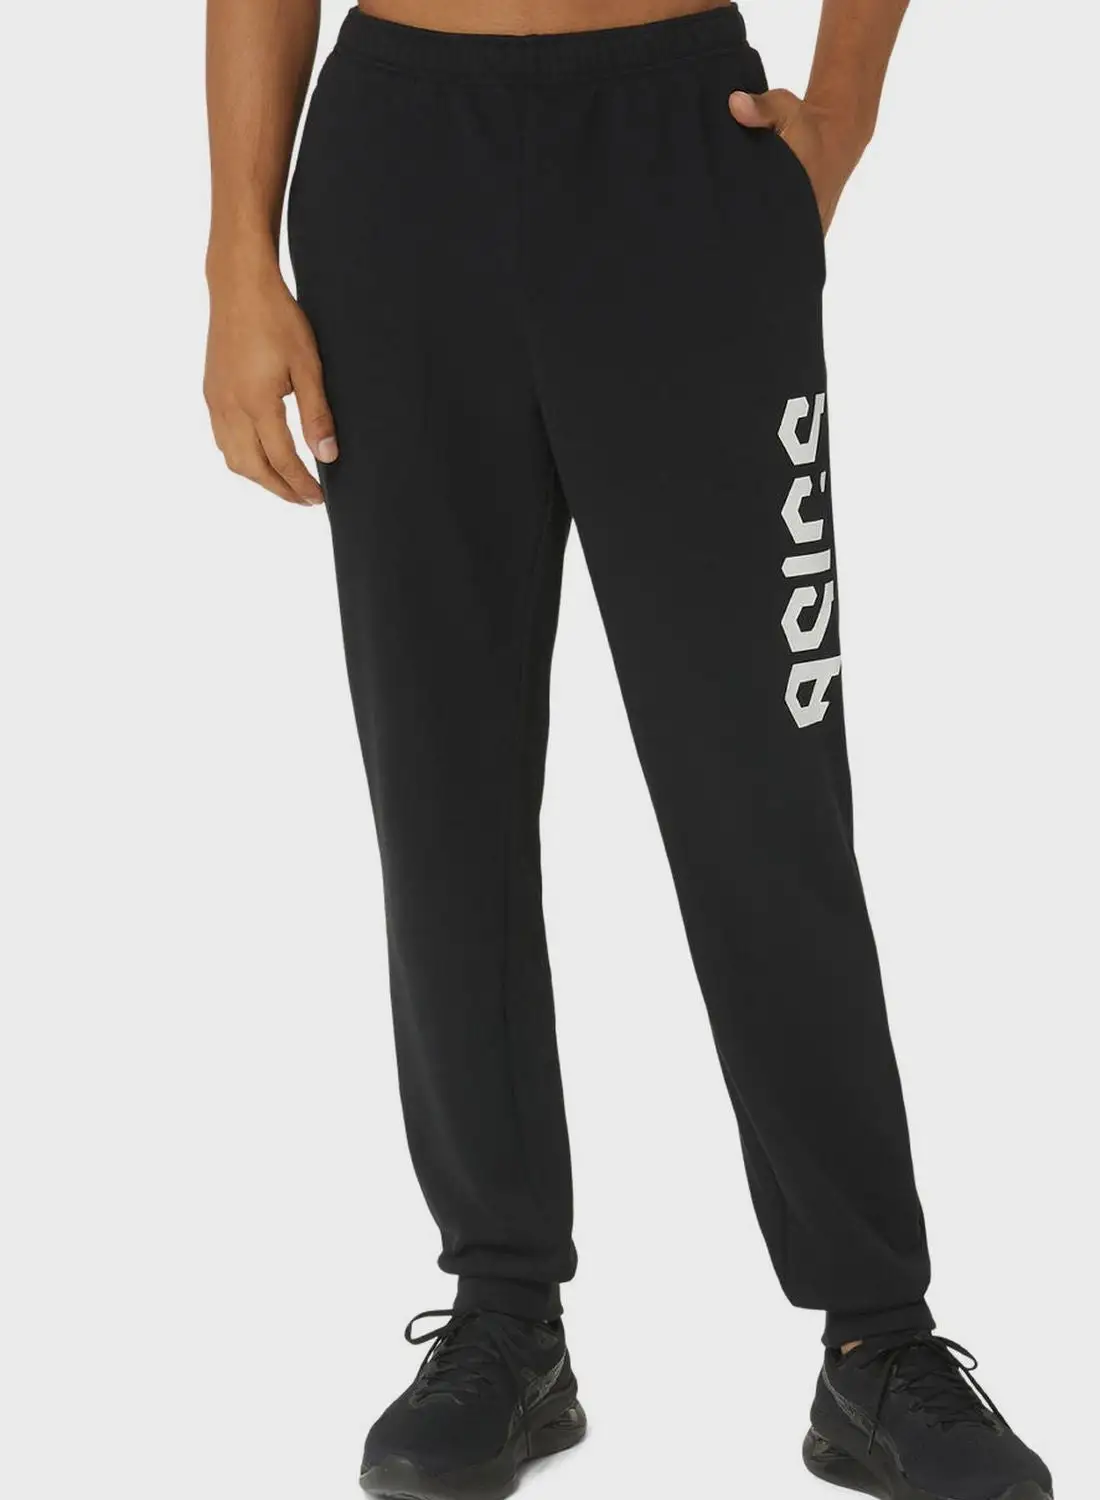 asics Hex Graphic French Terry Pants